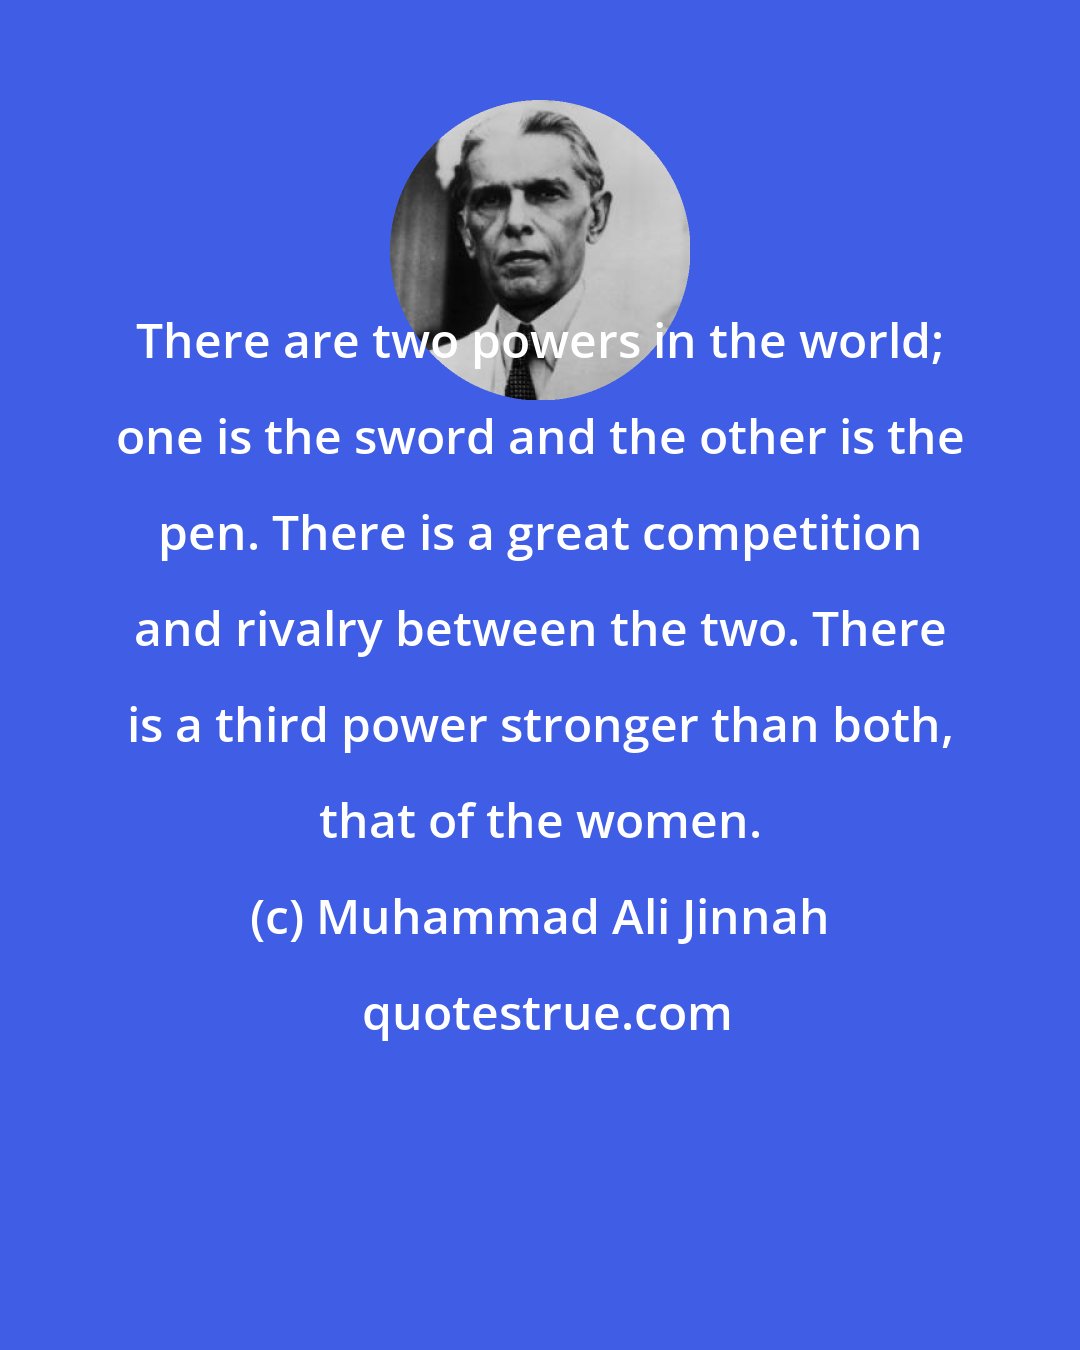 Muhammad Ali Jinnah: There are two powers in the world; one is the sword and the other is the pen. There is a great competition and rivalry between the two. There is a third power stronger than both, that of the women.